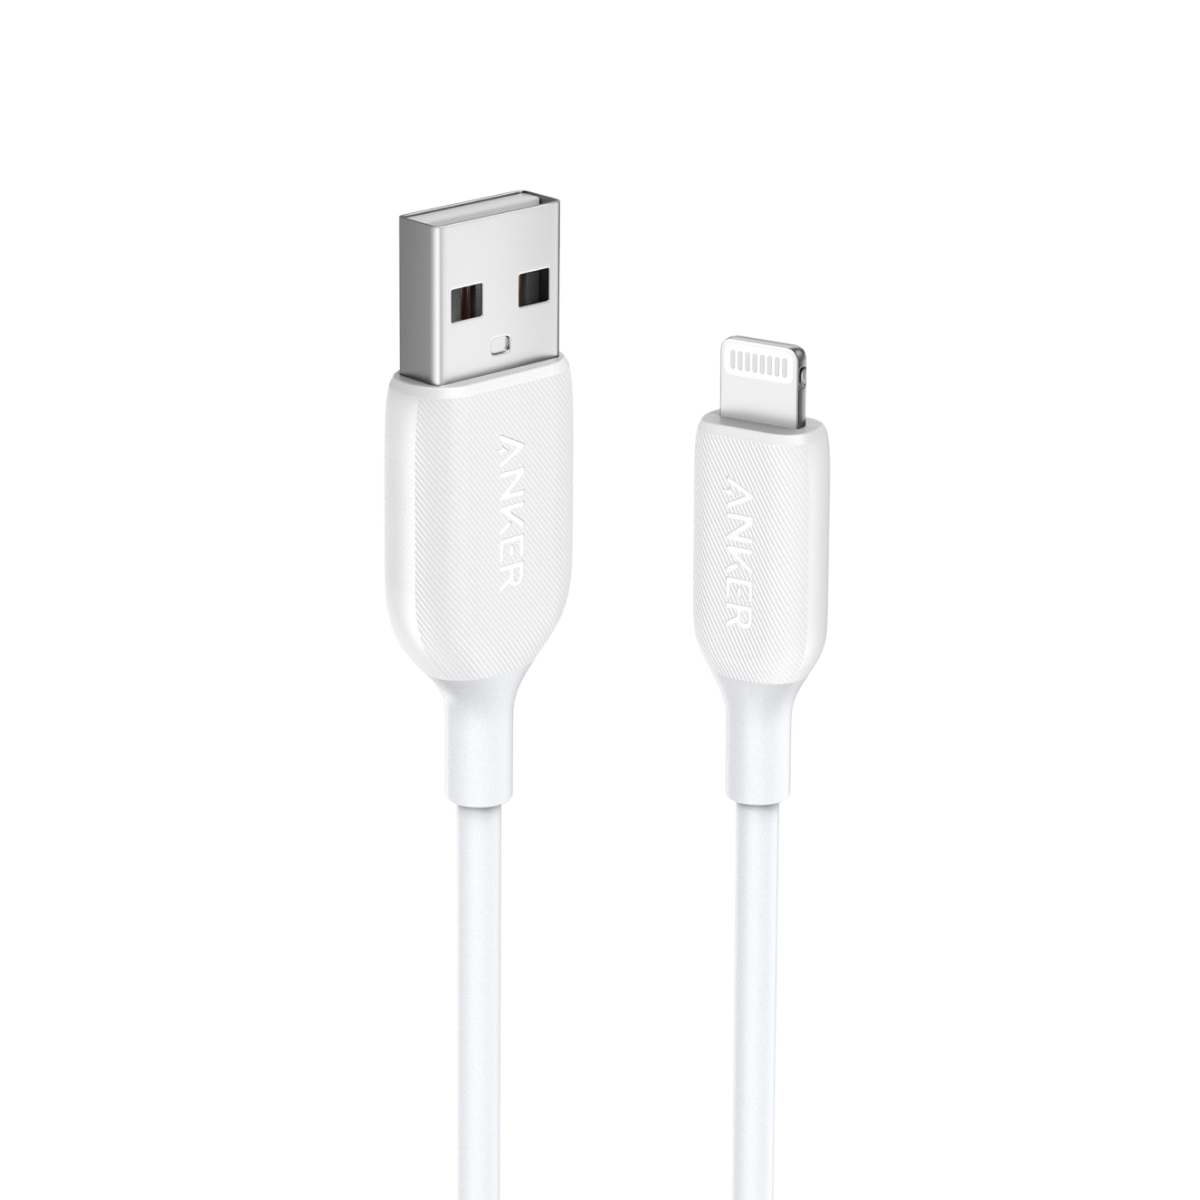 Anker <b>541</b> USB-A to Lightning Cable (3 ft / 6 ft)